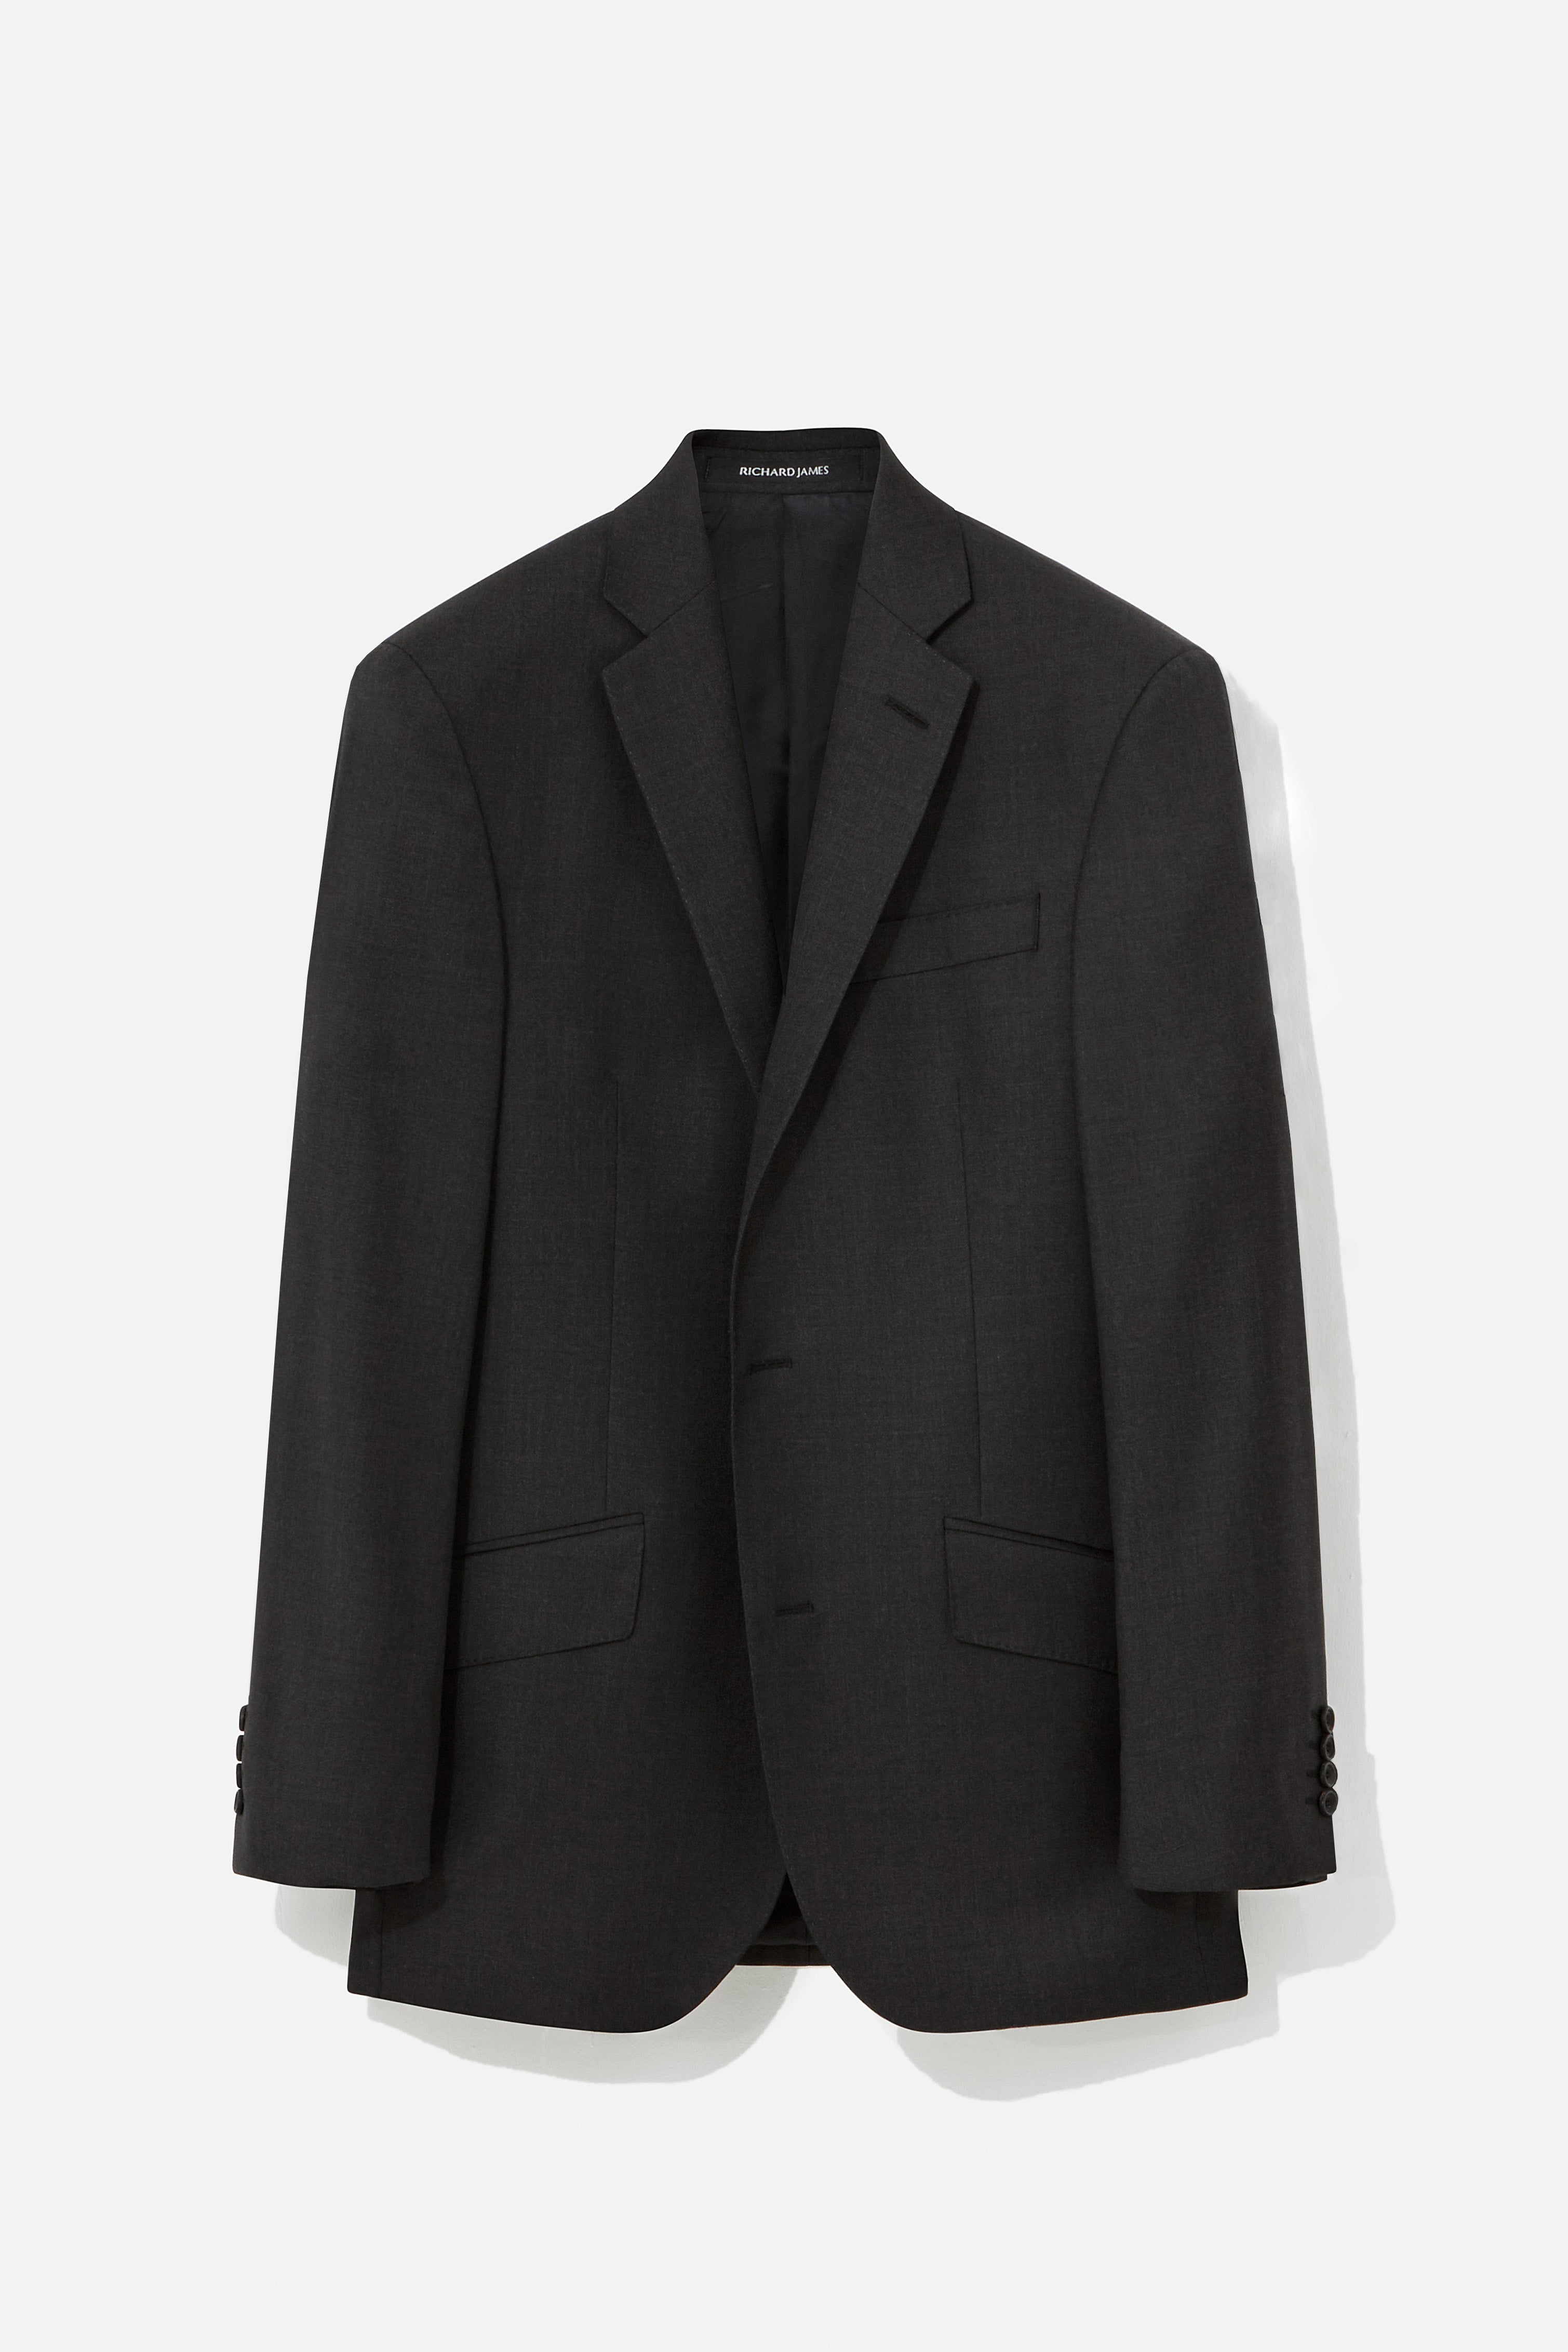 Charcoal Twill Suit